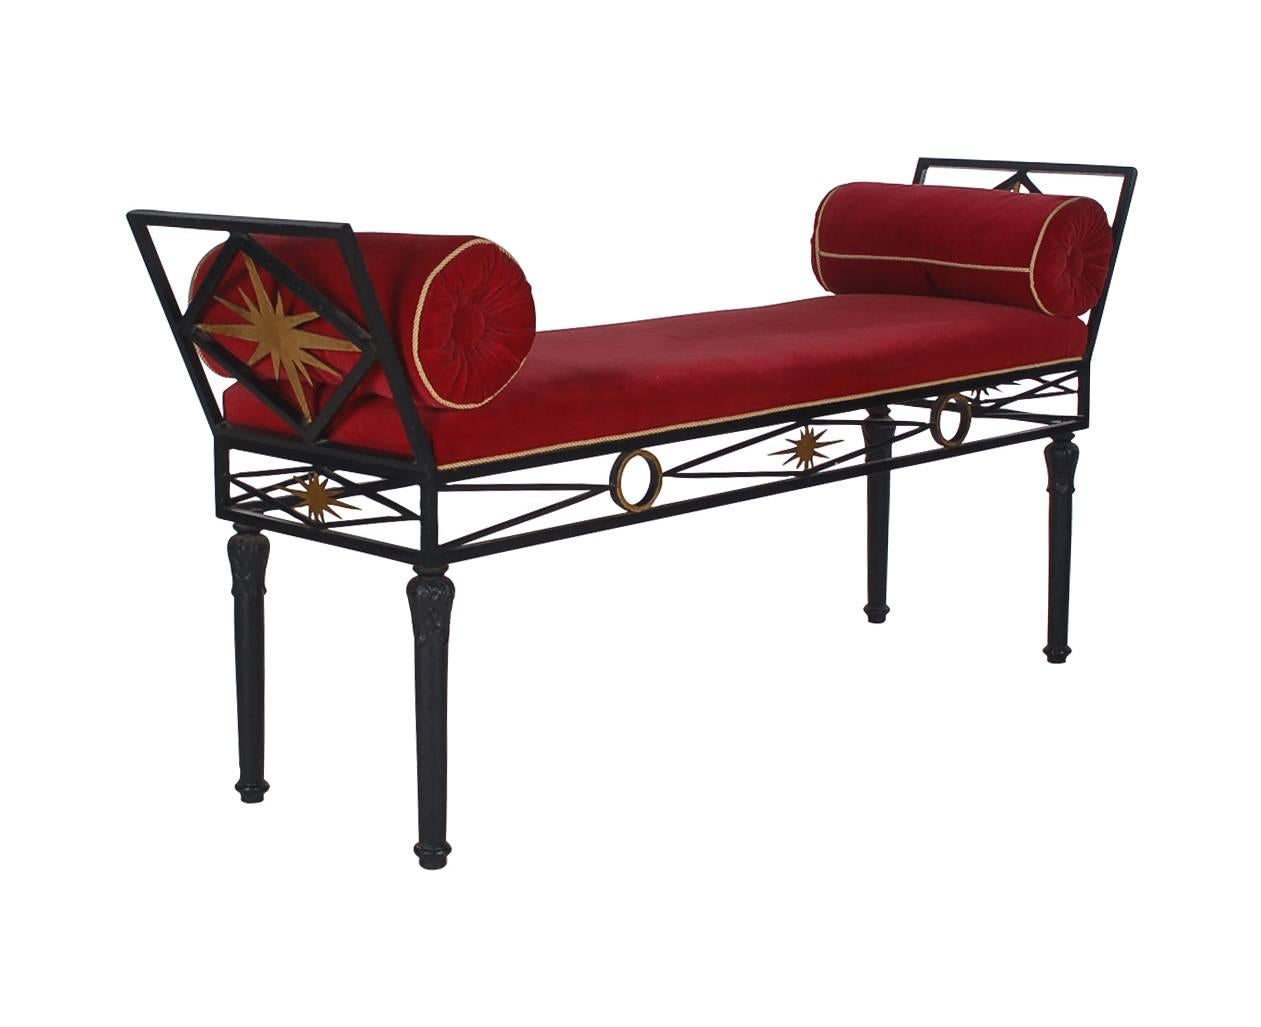 A very high-quality Italian bench. It features heavy cast iron framing, gold gilded details with velvet cushion and pillows. 

In the style of Maison Jansen or James Mont.